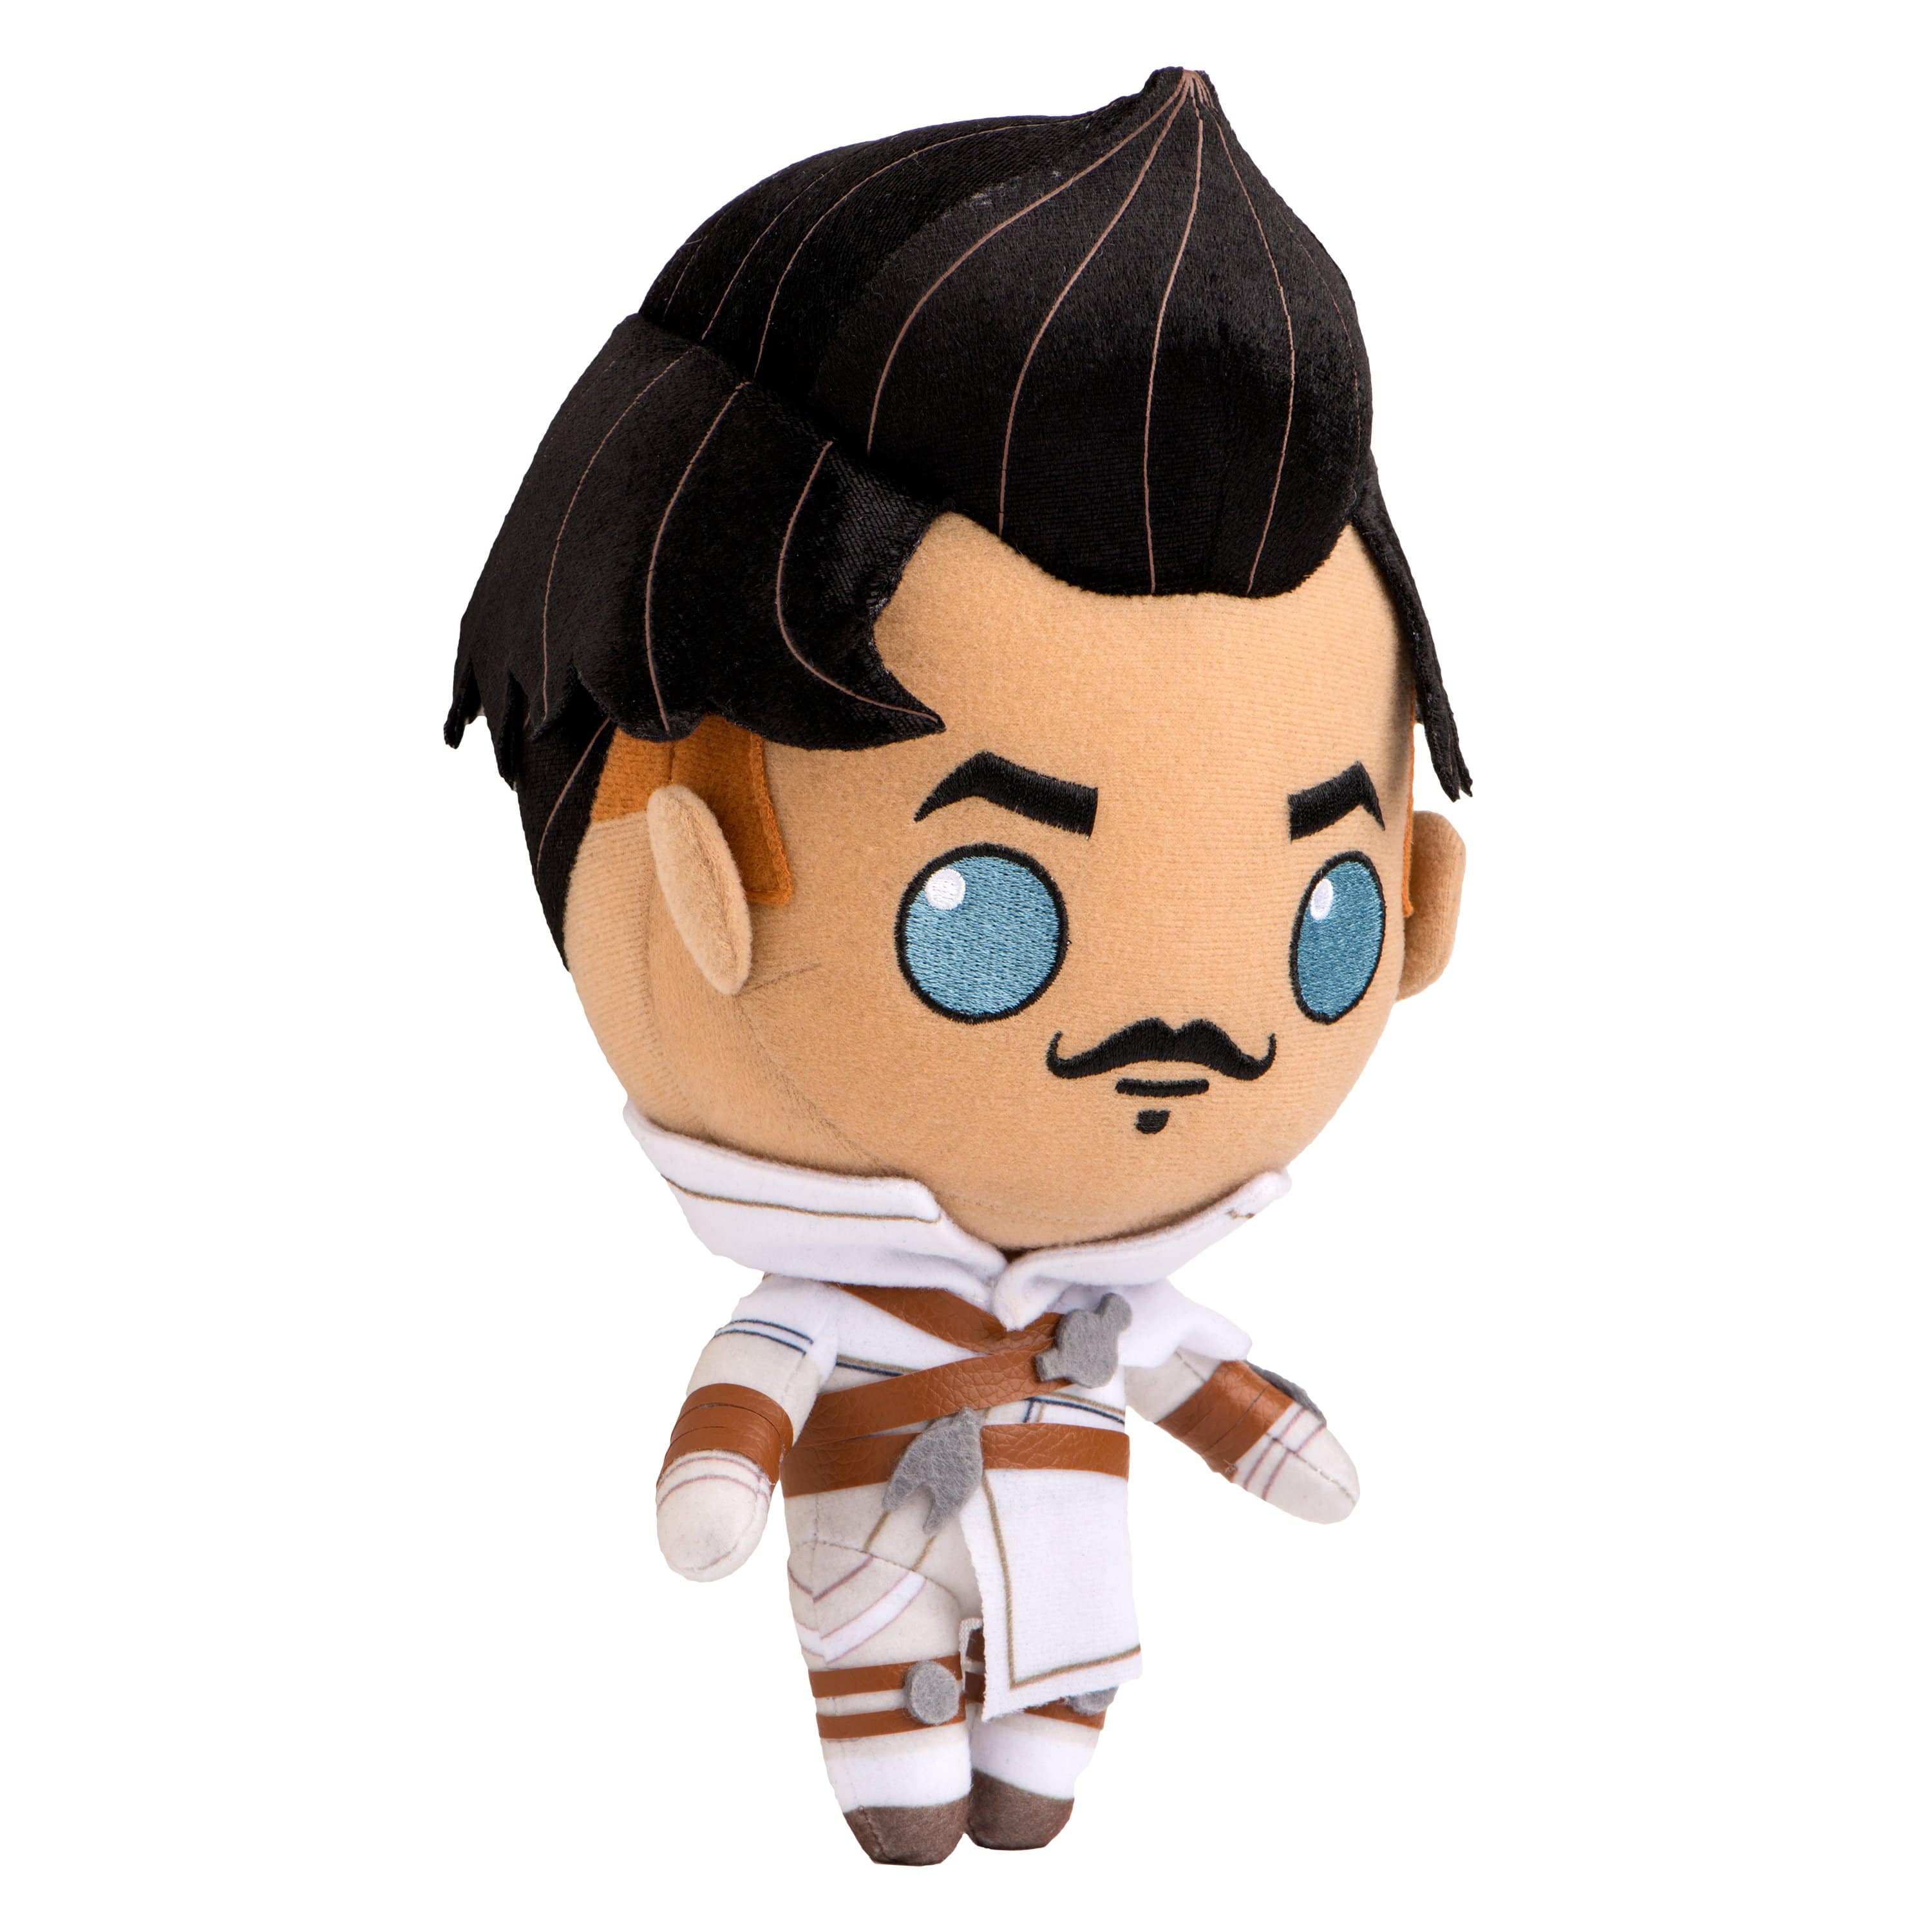 Dragon Age: Inquisition - Dorian Collector's Stuffed Plush Toy Side View